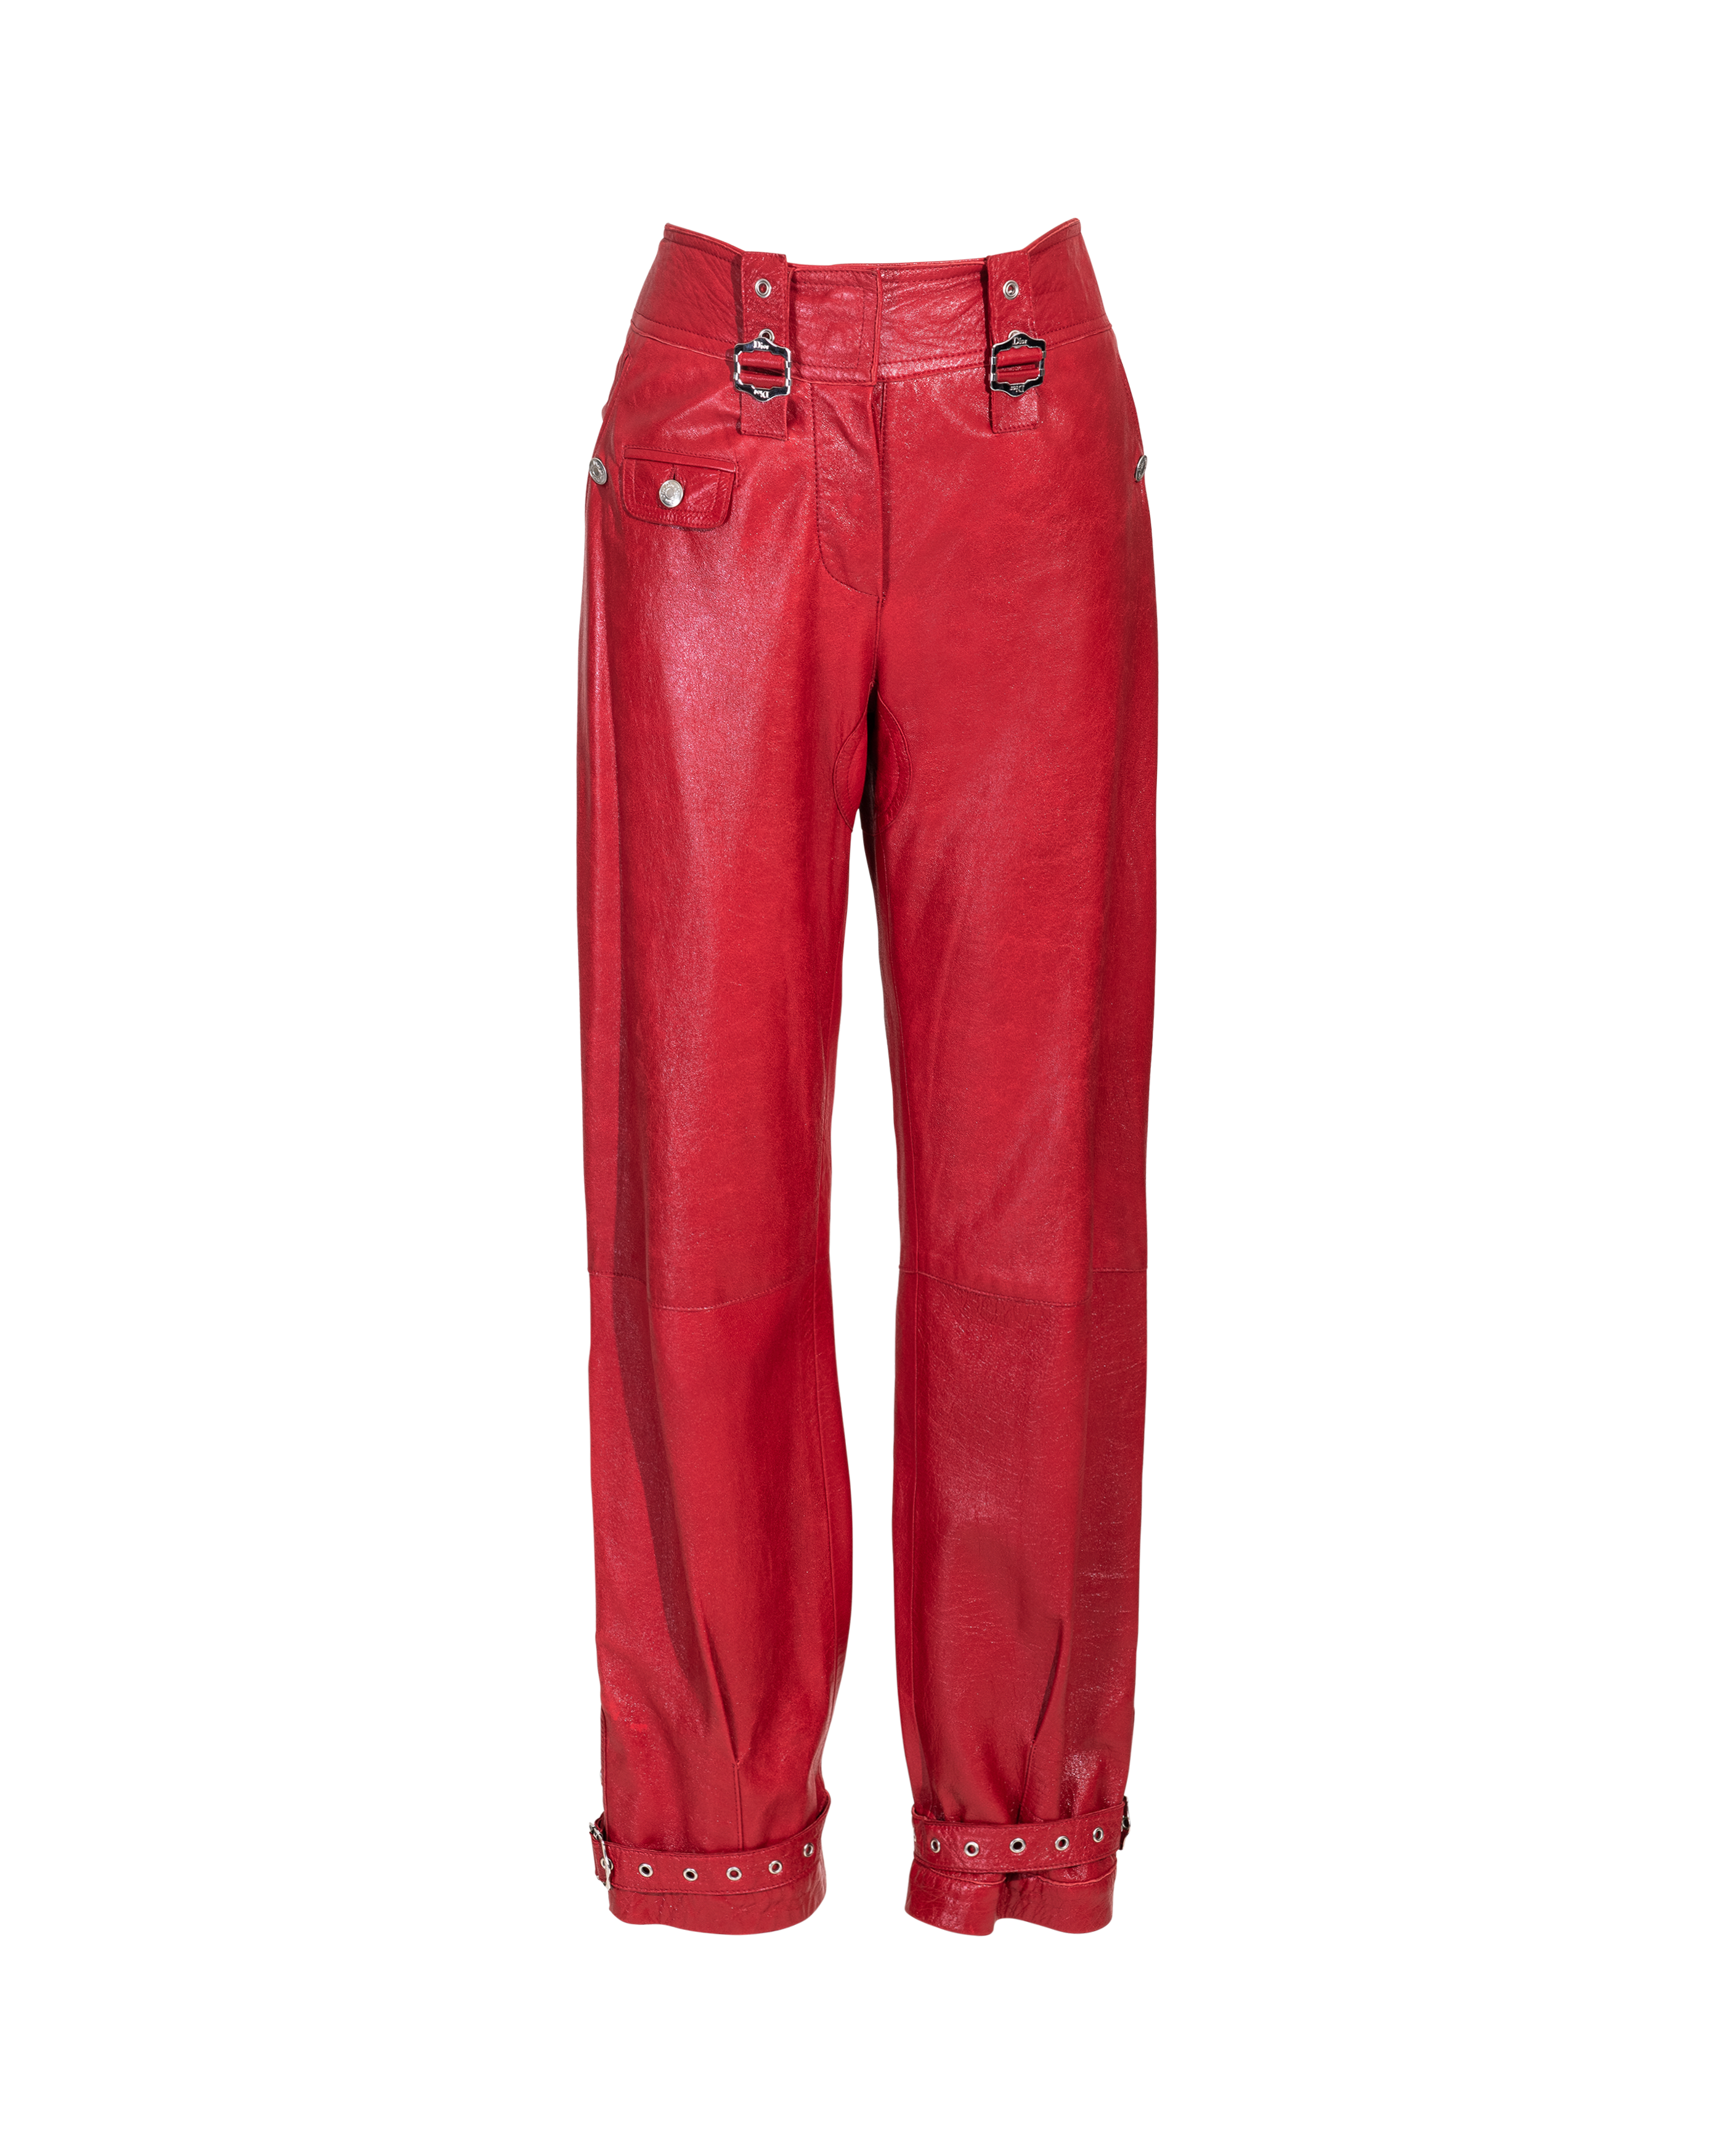 A/W 2003 ‘Hard Core’ Collection Red Leather Pants